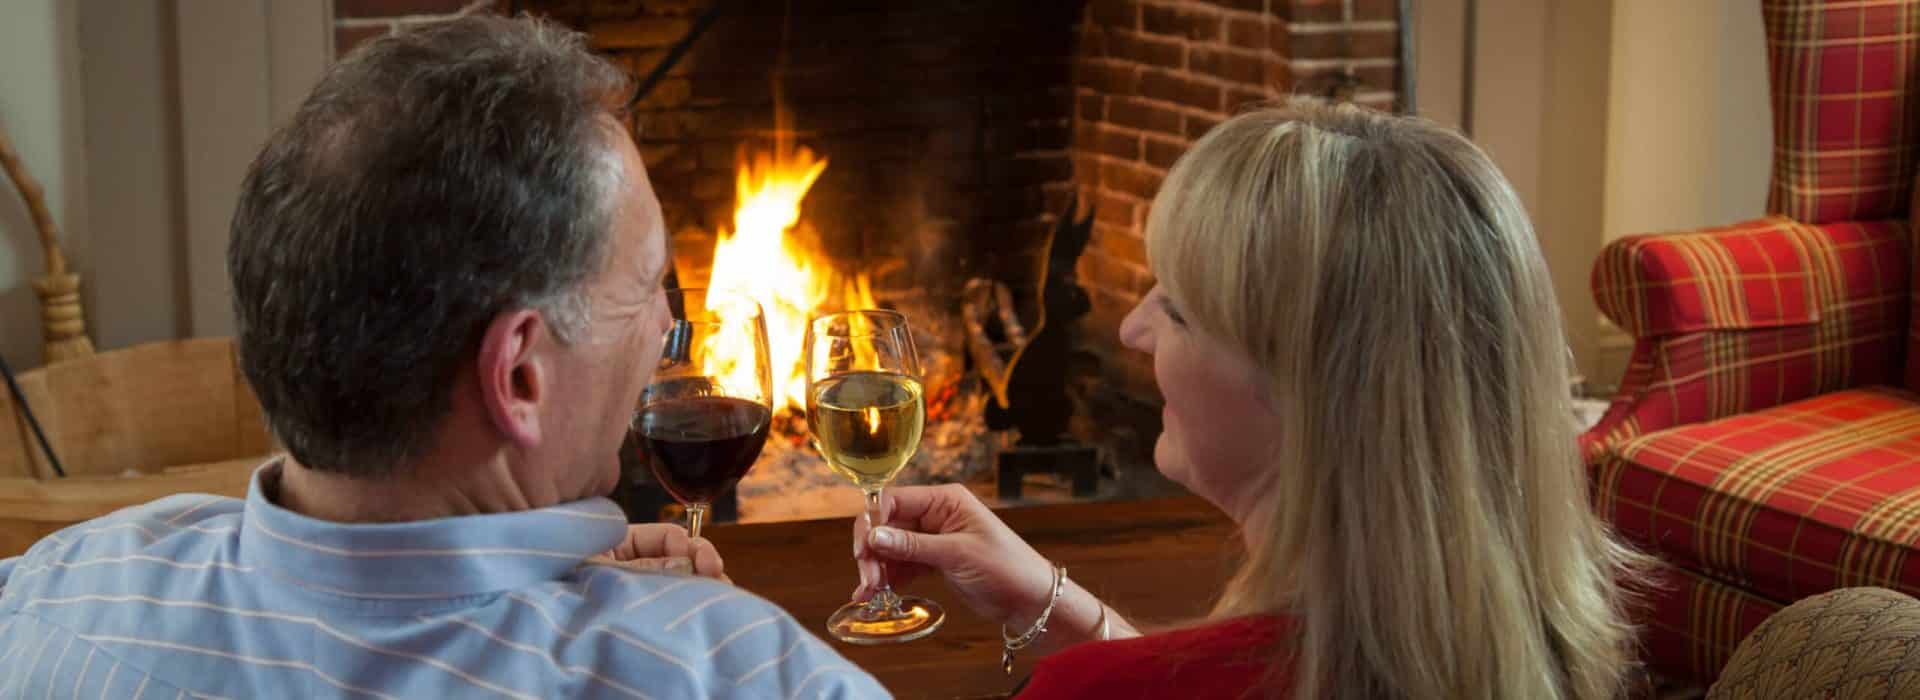 Couple toasting each other with wine in front of a fireplace